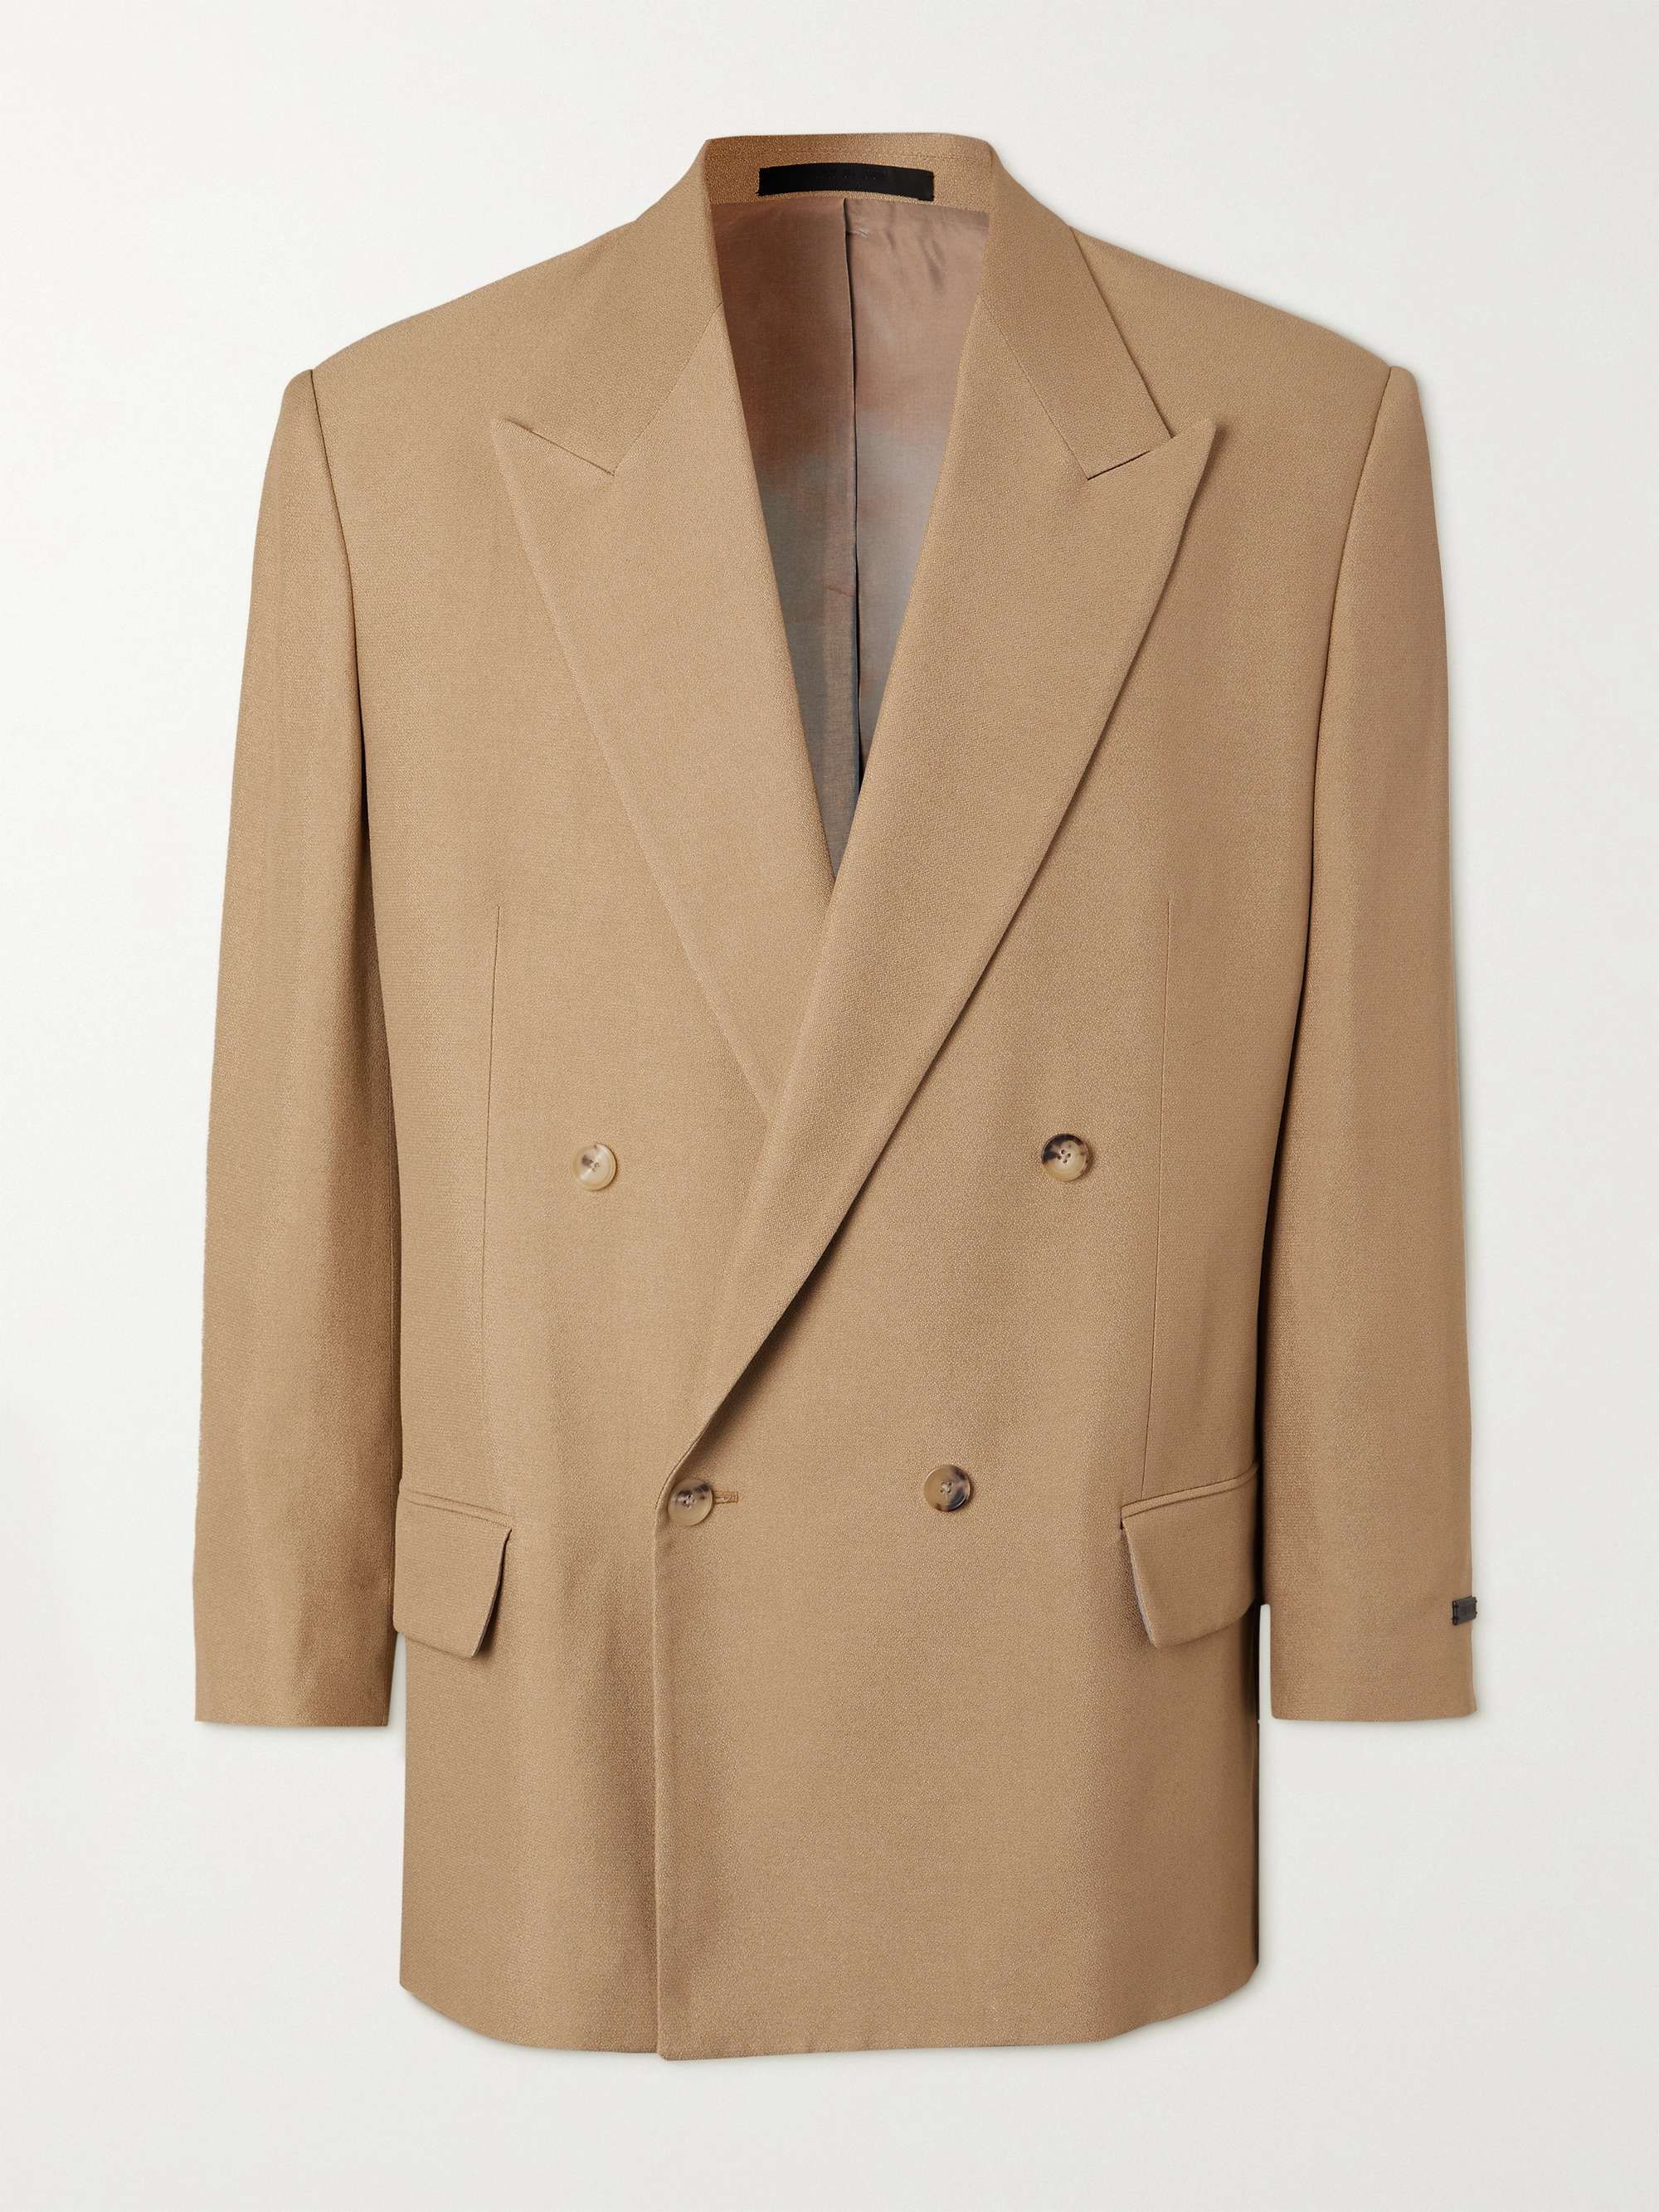 FEAR OF GOD California Double-Breasted Crepe Blazer